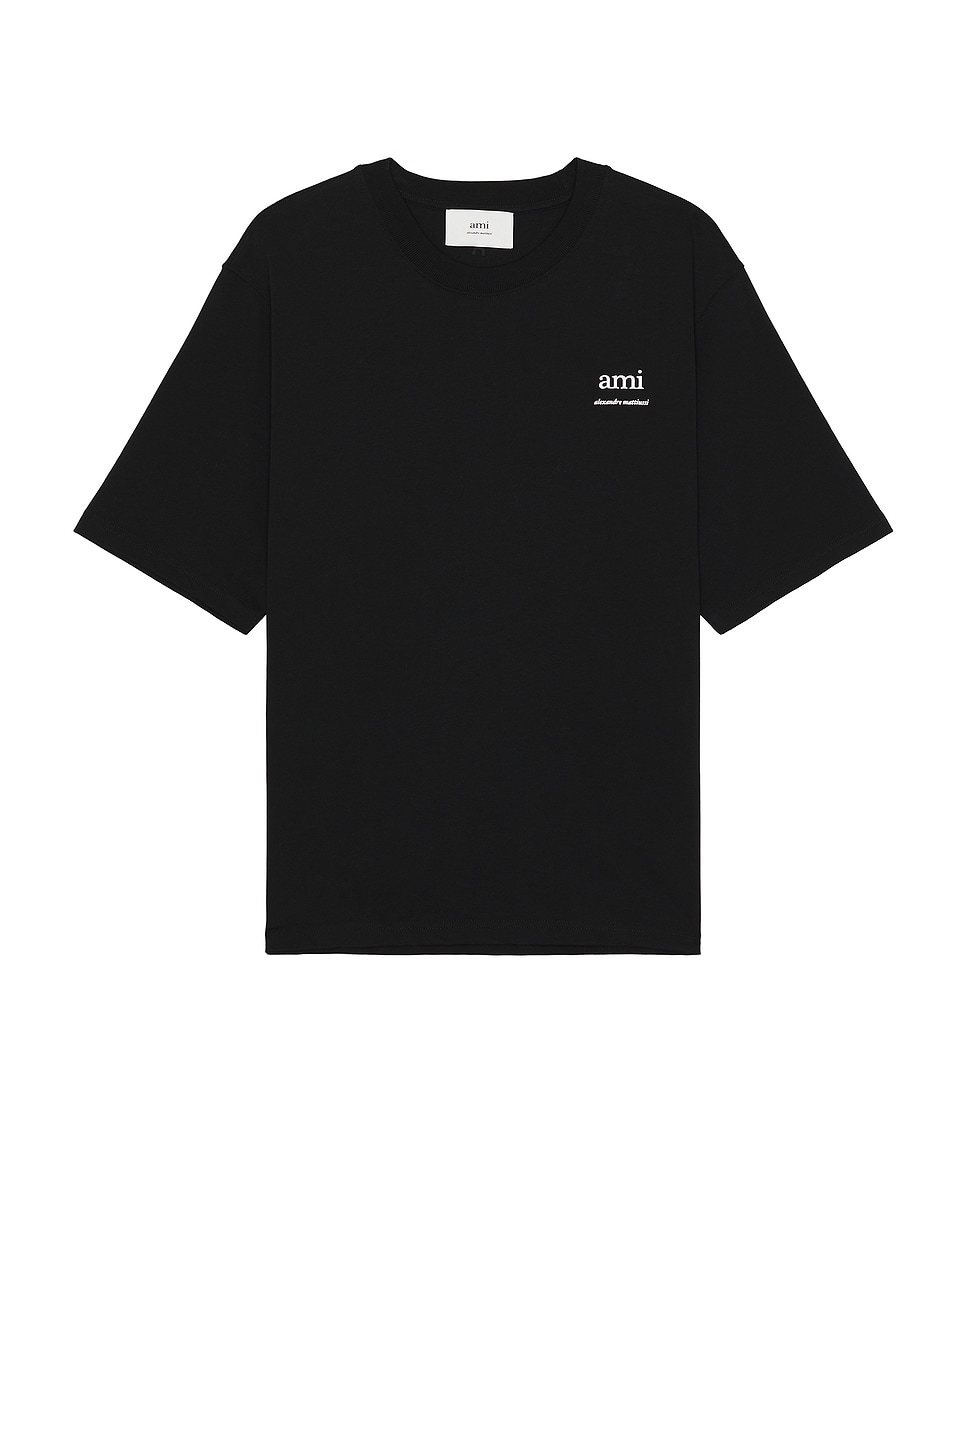 Image 1 of ami T-shirt in Black